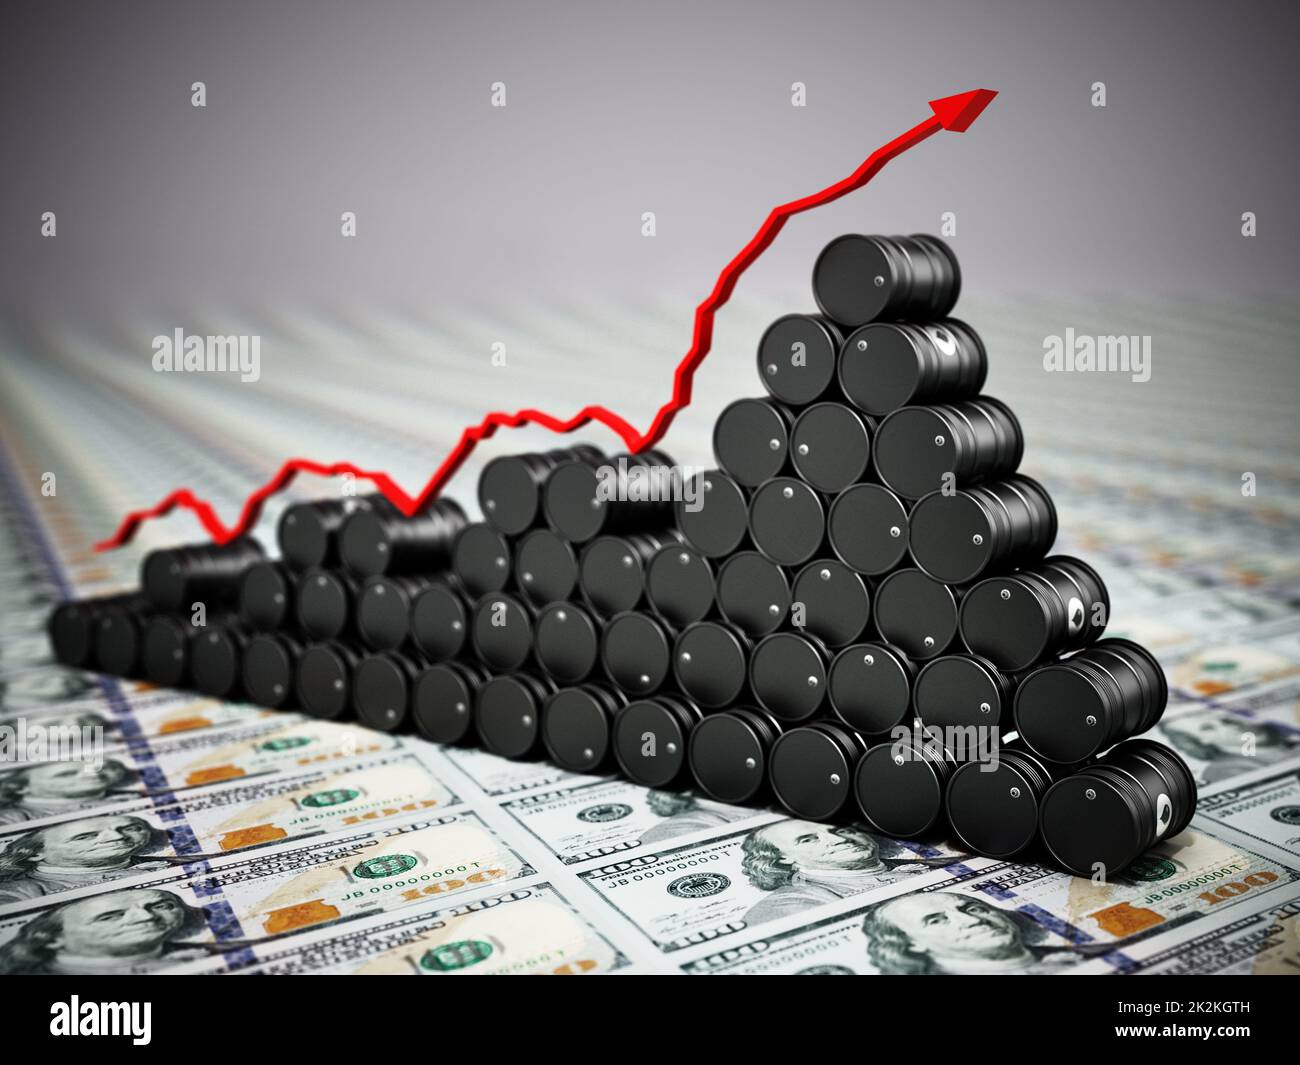 Crude oil drums standing on dollar bills. Rising oil prices concept. 3D illustration Stock Photo